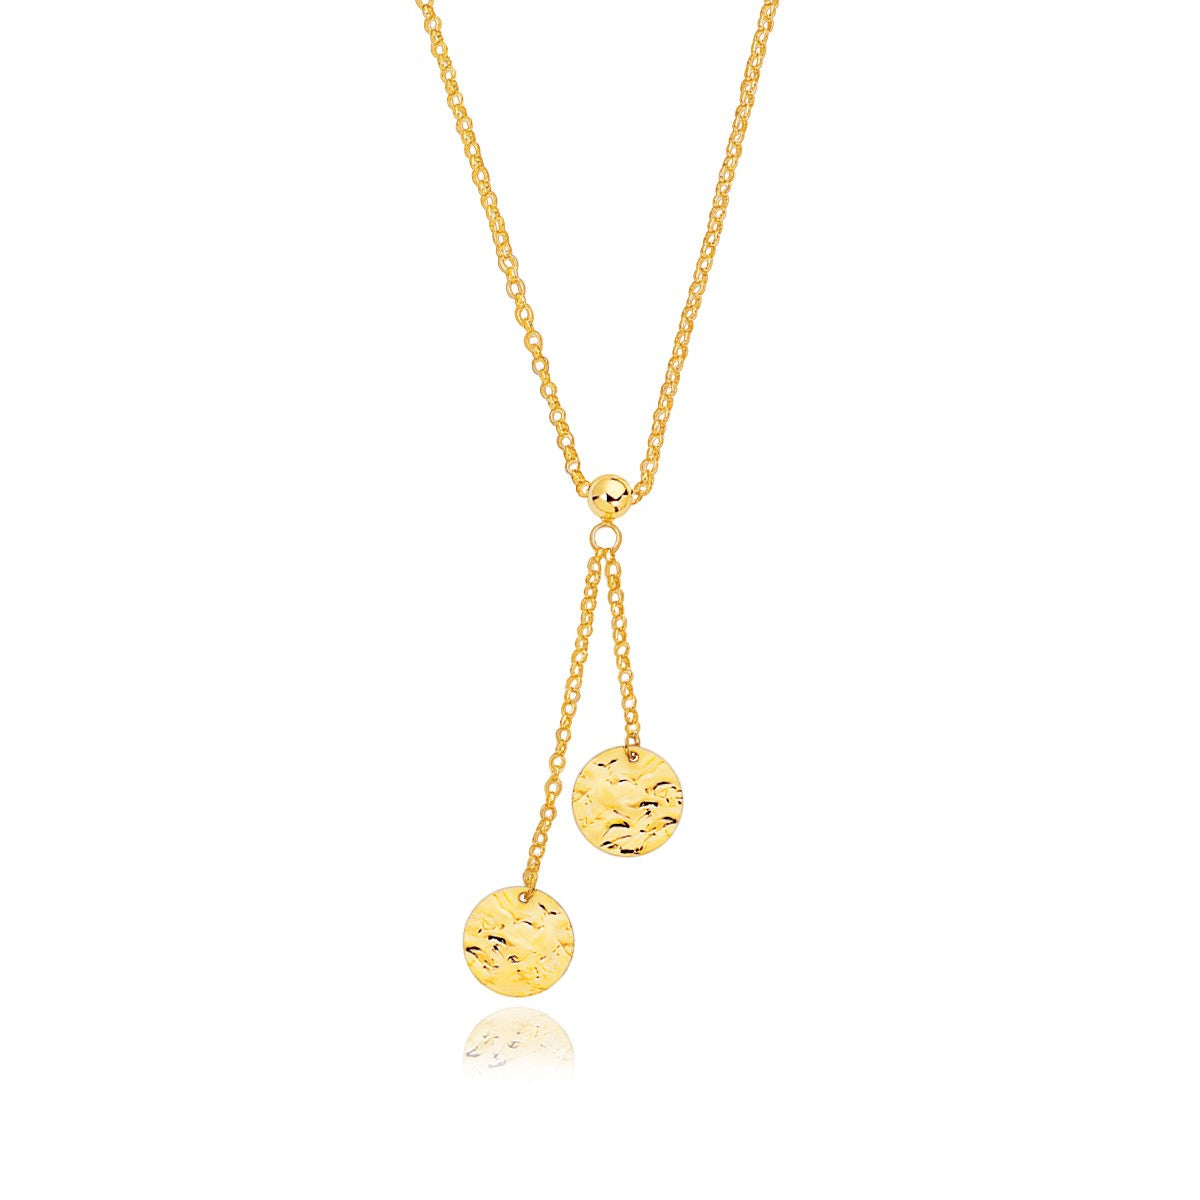 14k Yellow Gold Hammered Disc Lariat 17 inches Necklace